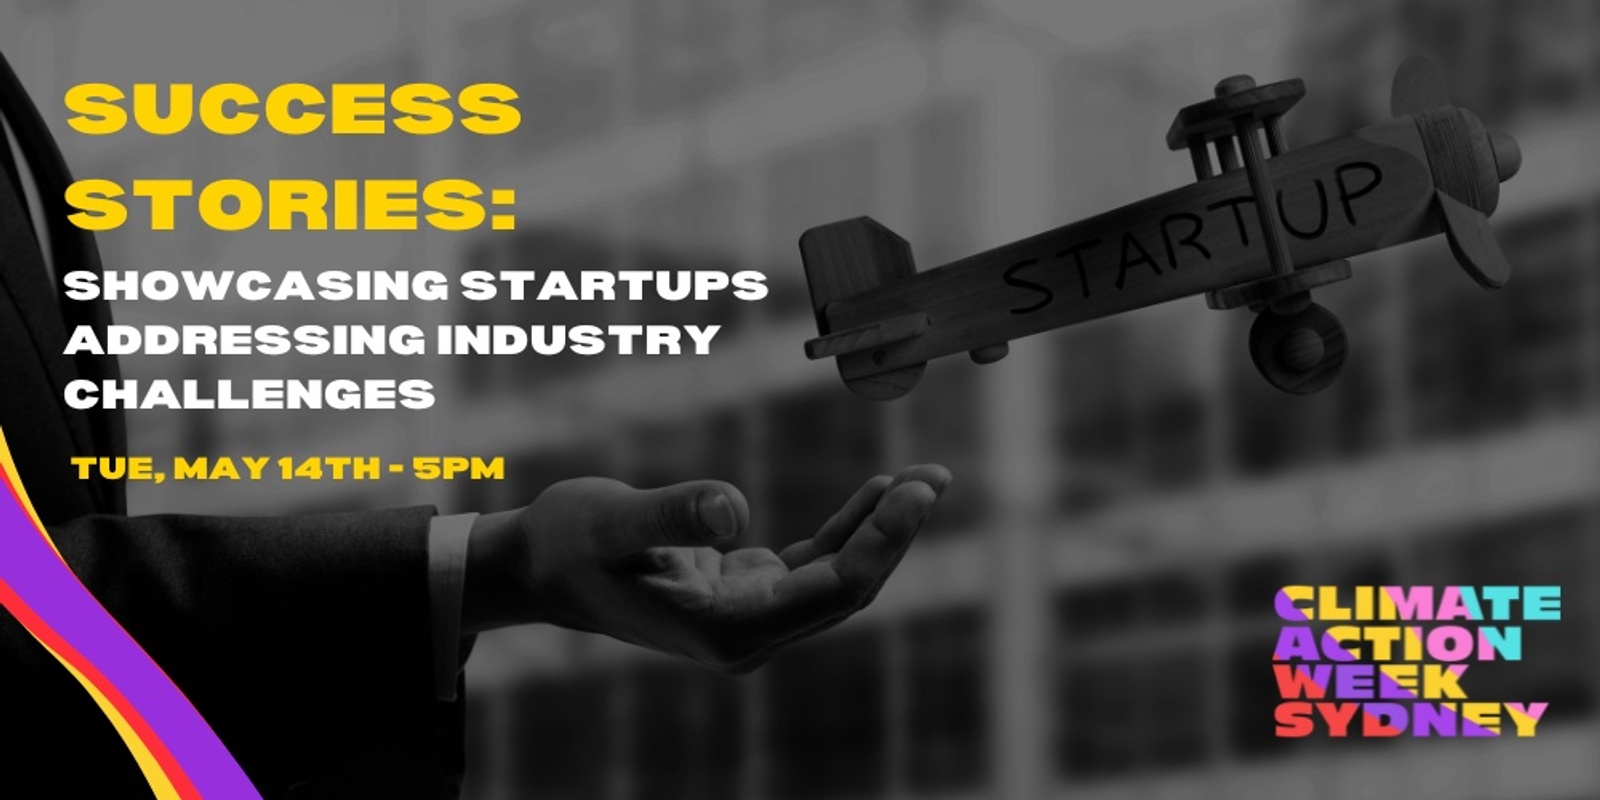 Banner image for Success stories: Showcasing startups addressing industry challenges.